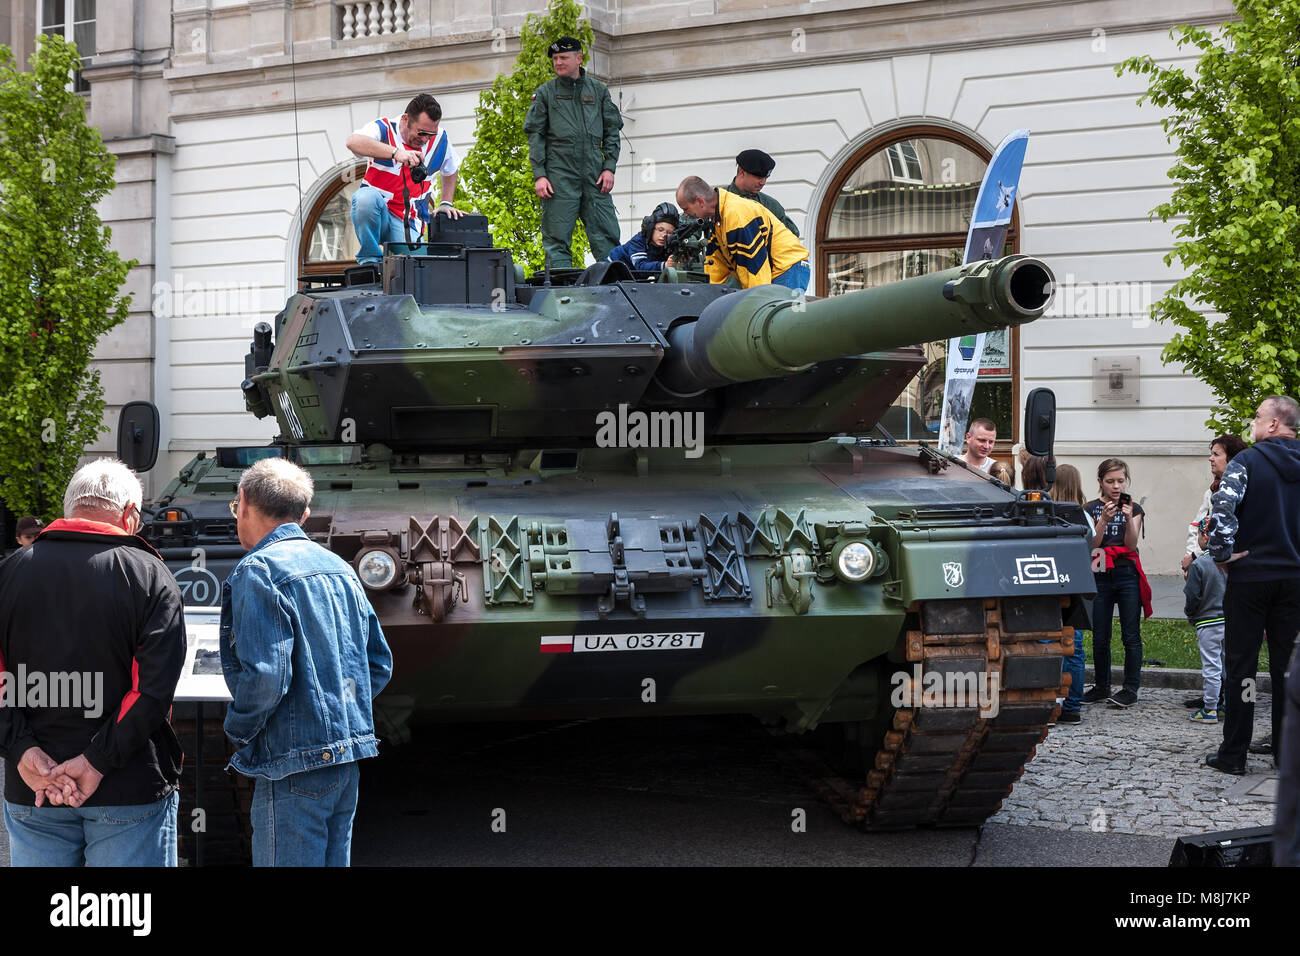 WARSAW, POLAND - MAY 08, 2015: Leopard 2 tank, improved 2A5 version. People curiously looking and learning during the public celebrations of 70th Anni Stock Photo